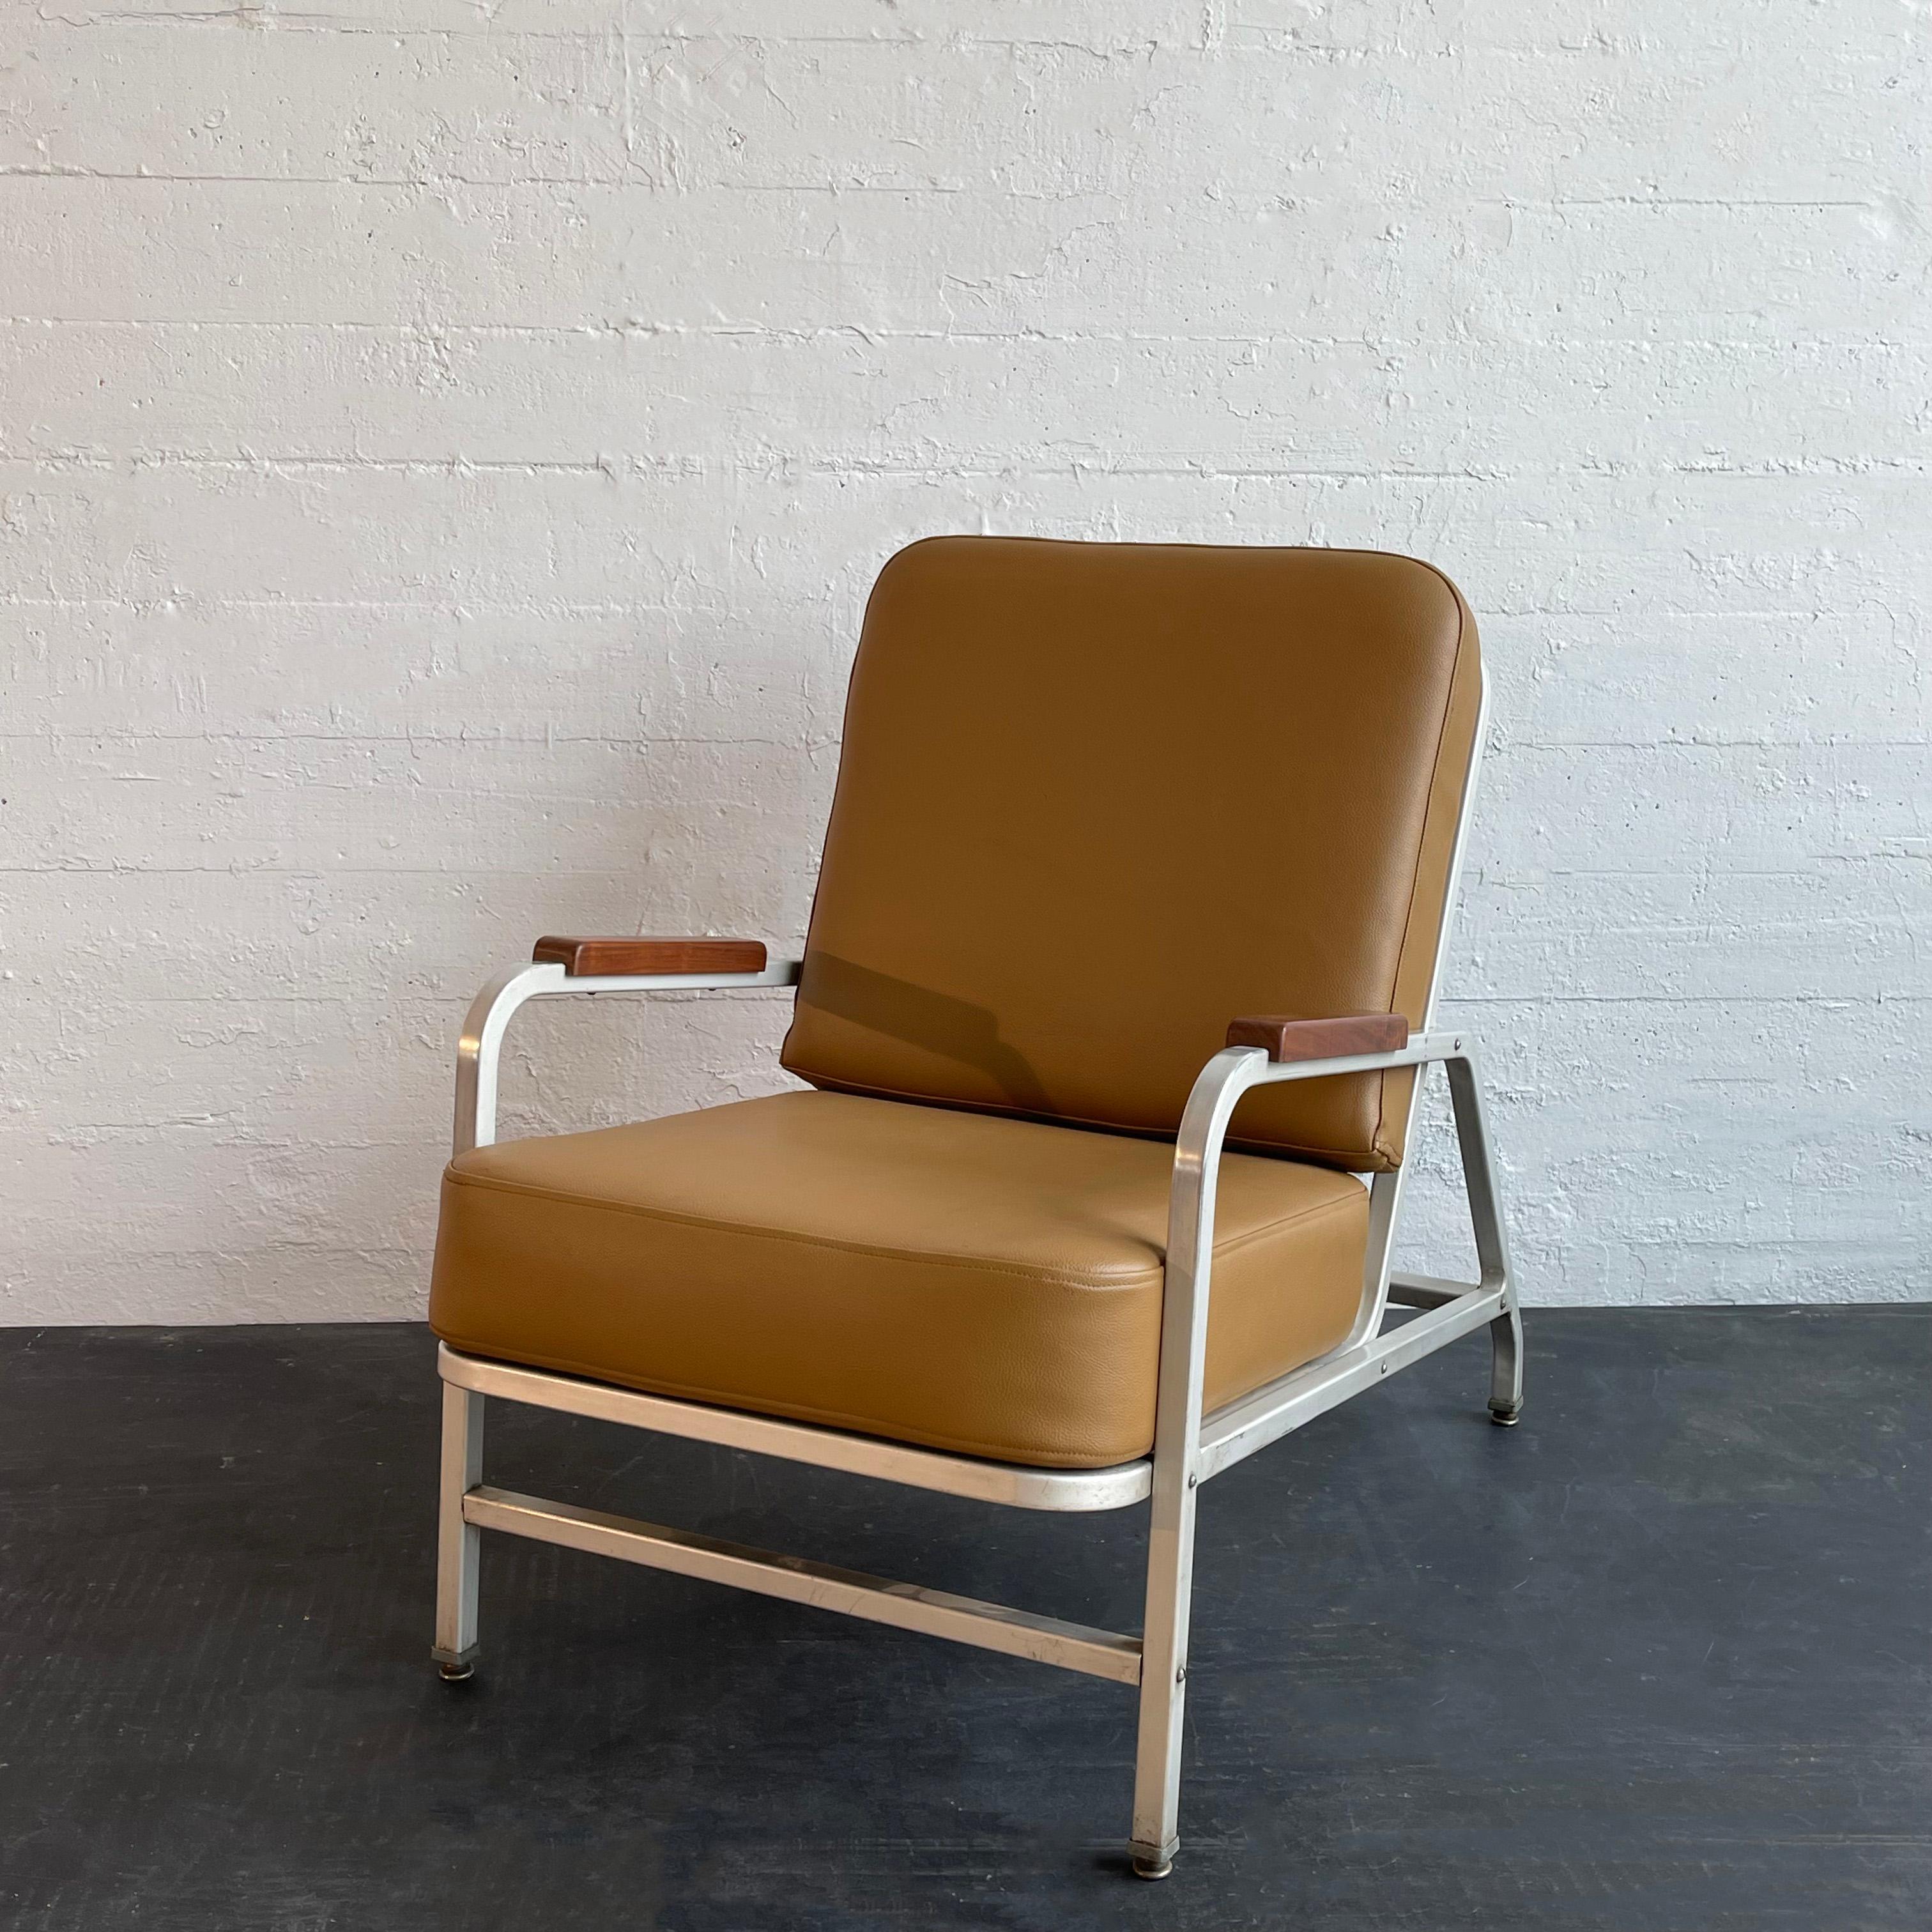 American Machine-Age Mid-Century Aluminum Lounge Chair For Sale